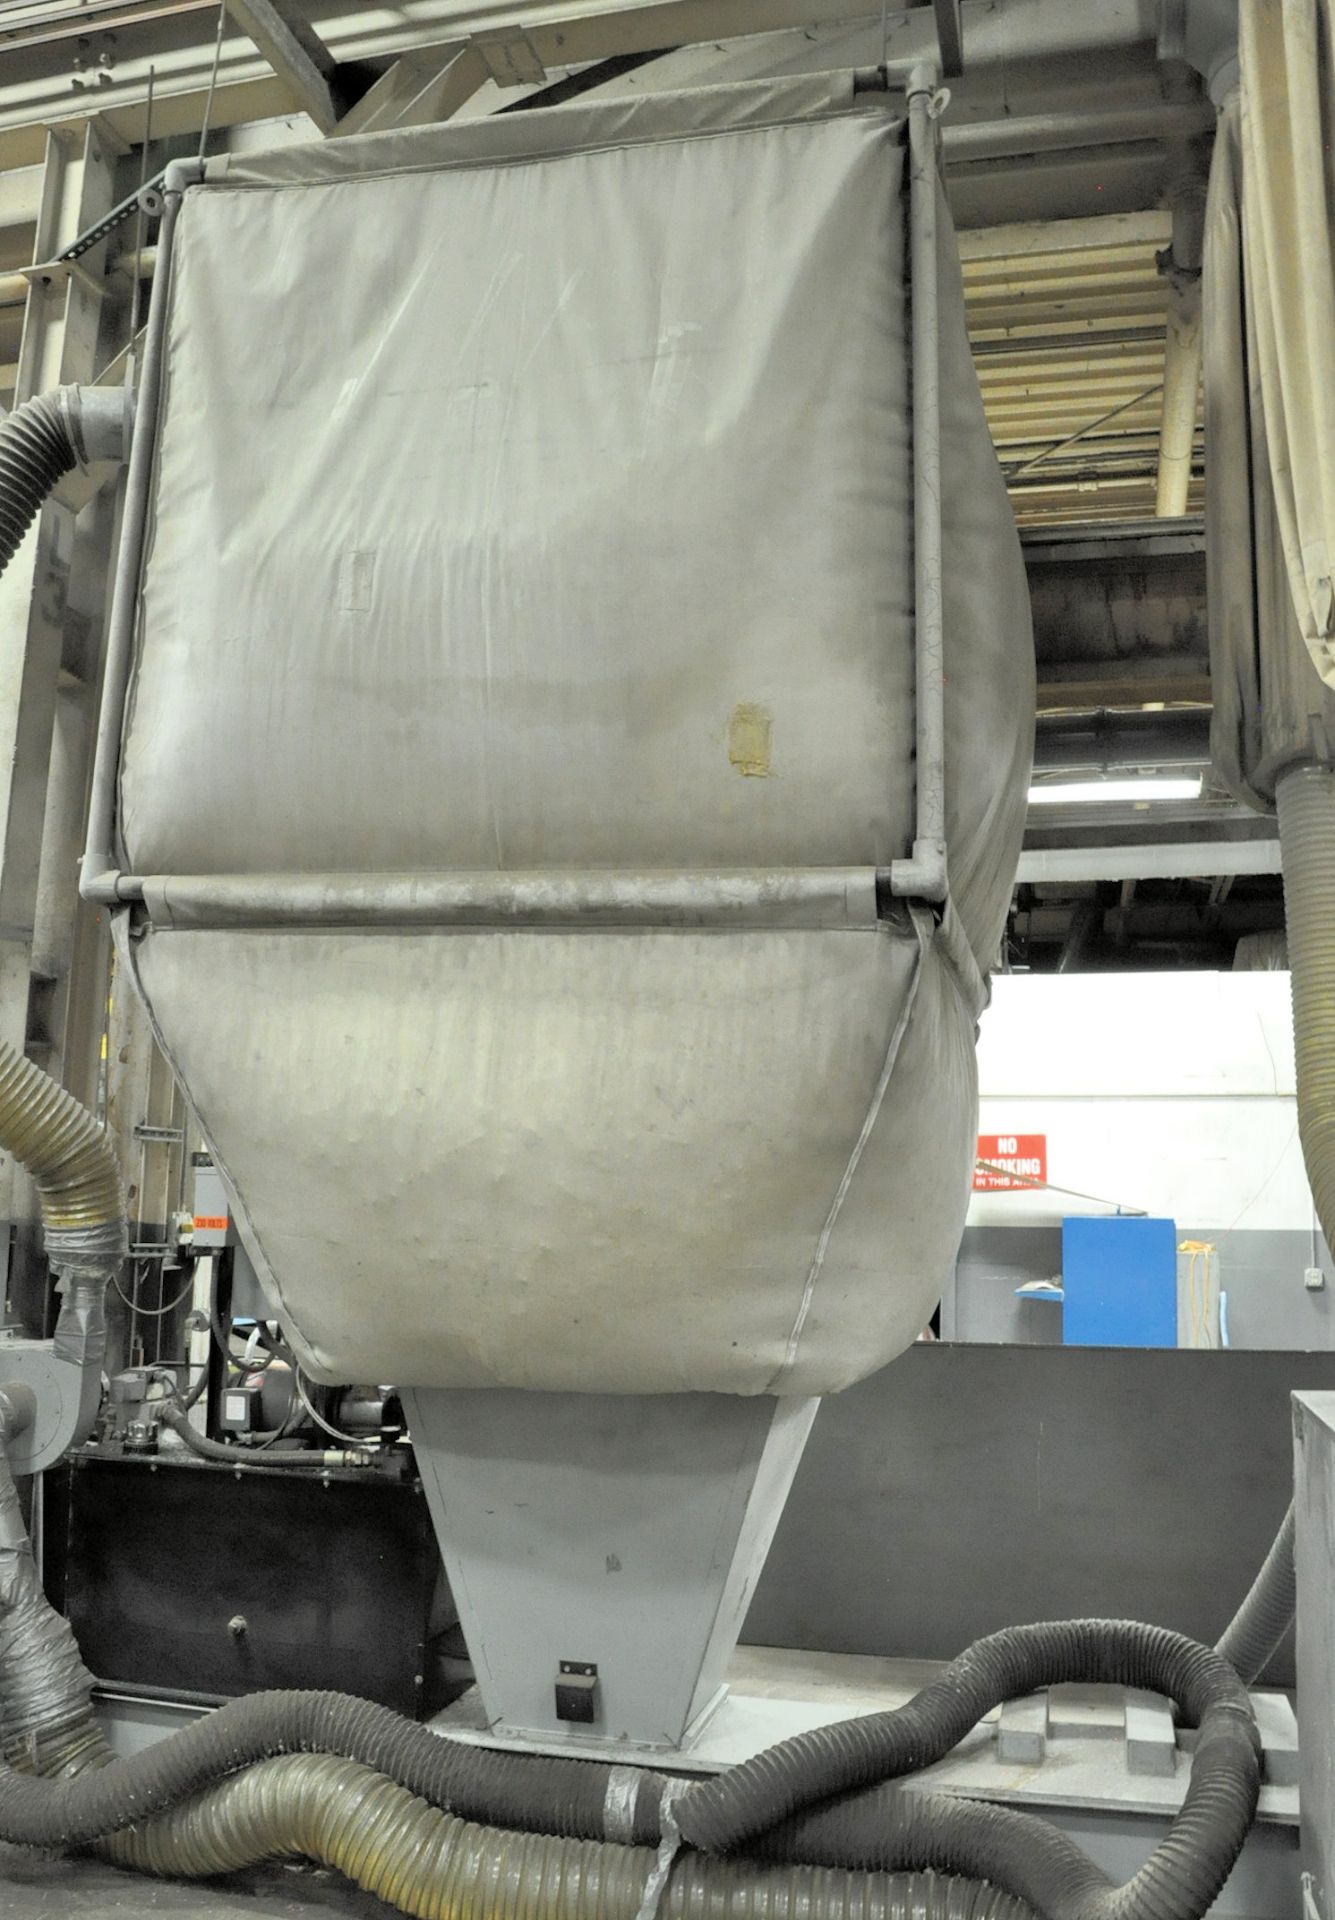 Custom Designed & Fabricated Foam Reclamation System, with Bag Type Dust Collector, Hopper, Blowers, - Image 2 of 6